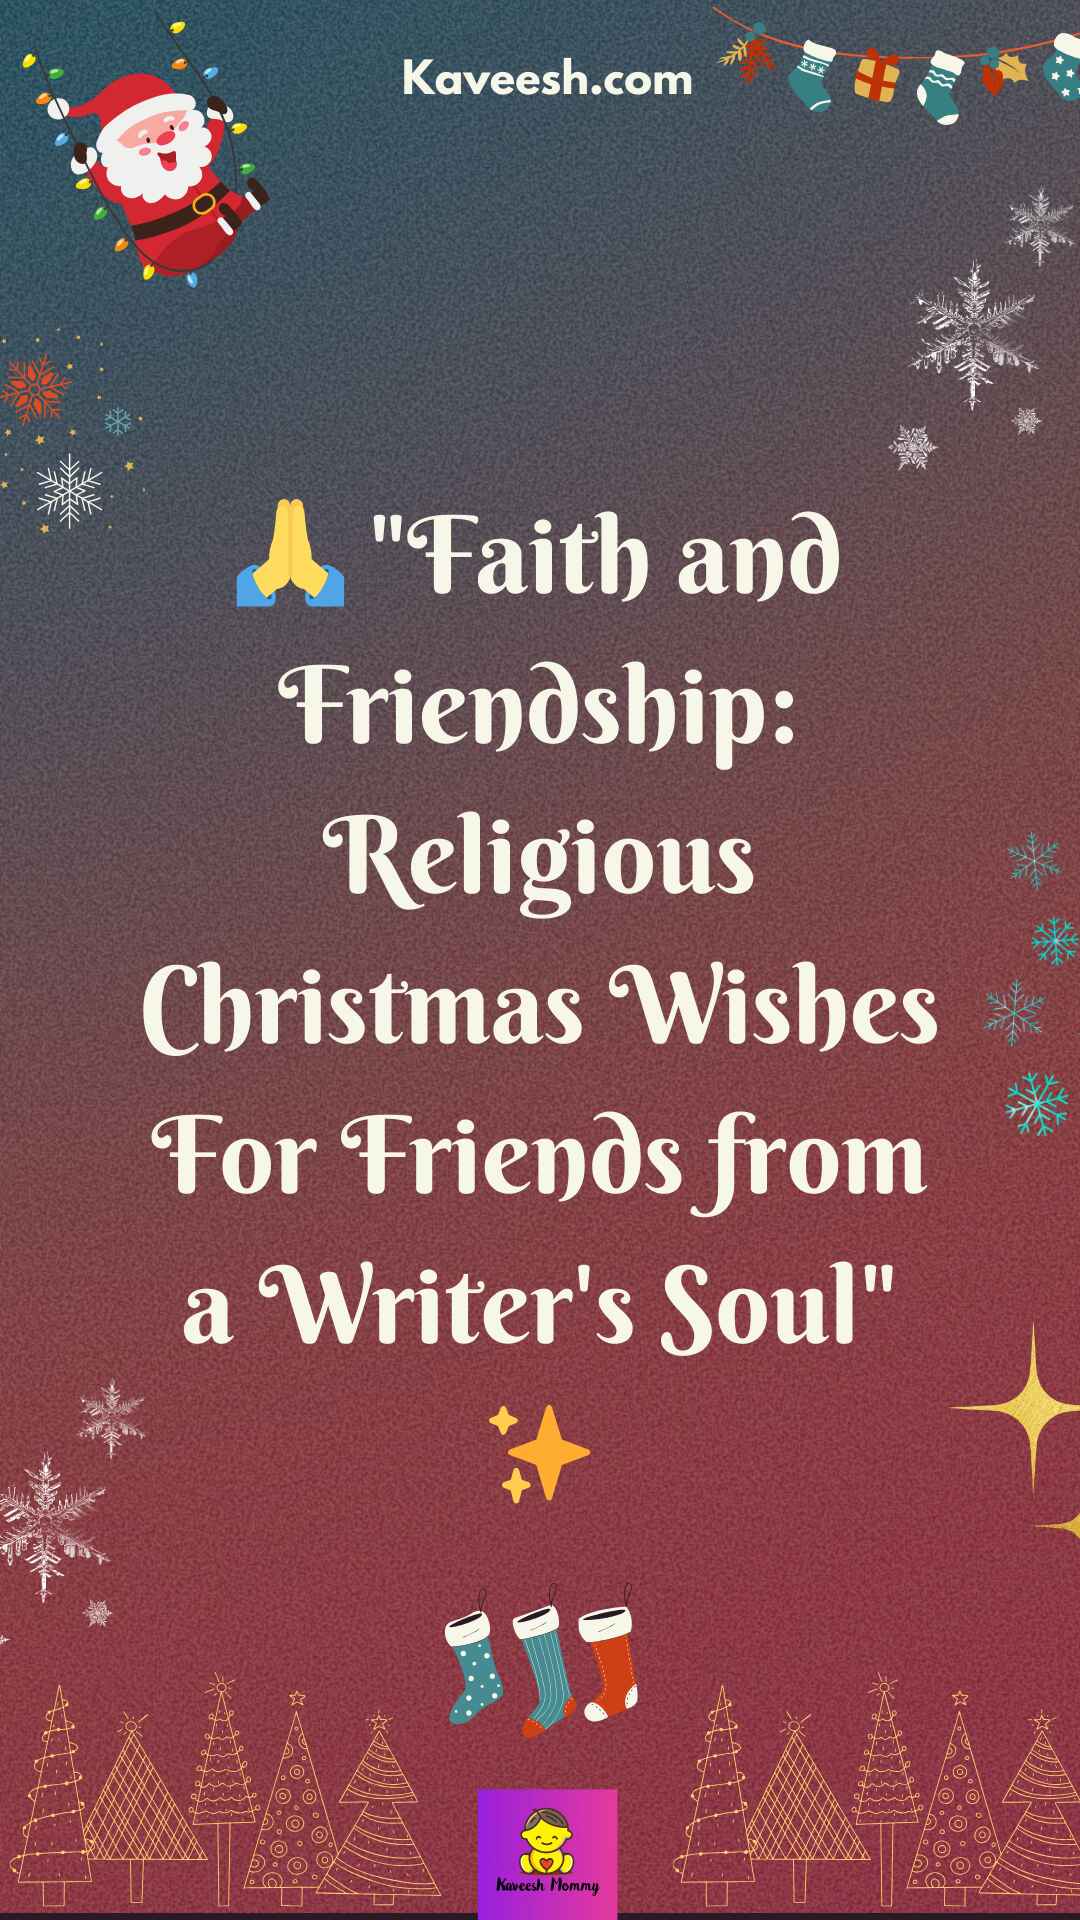 List of Religious Christmas Wishes for Friends